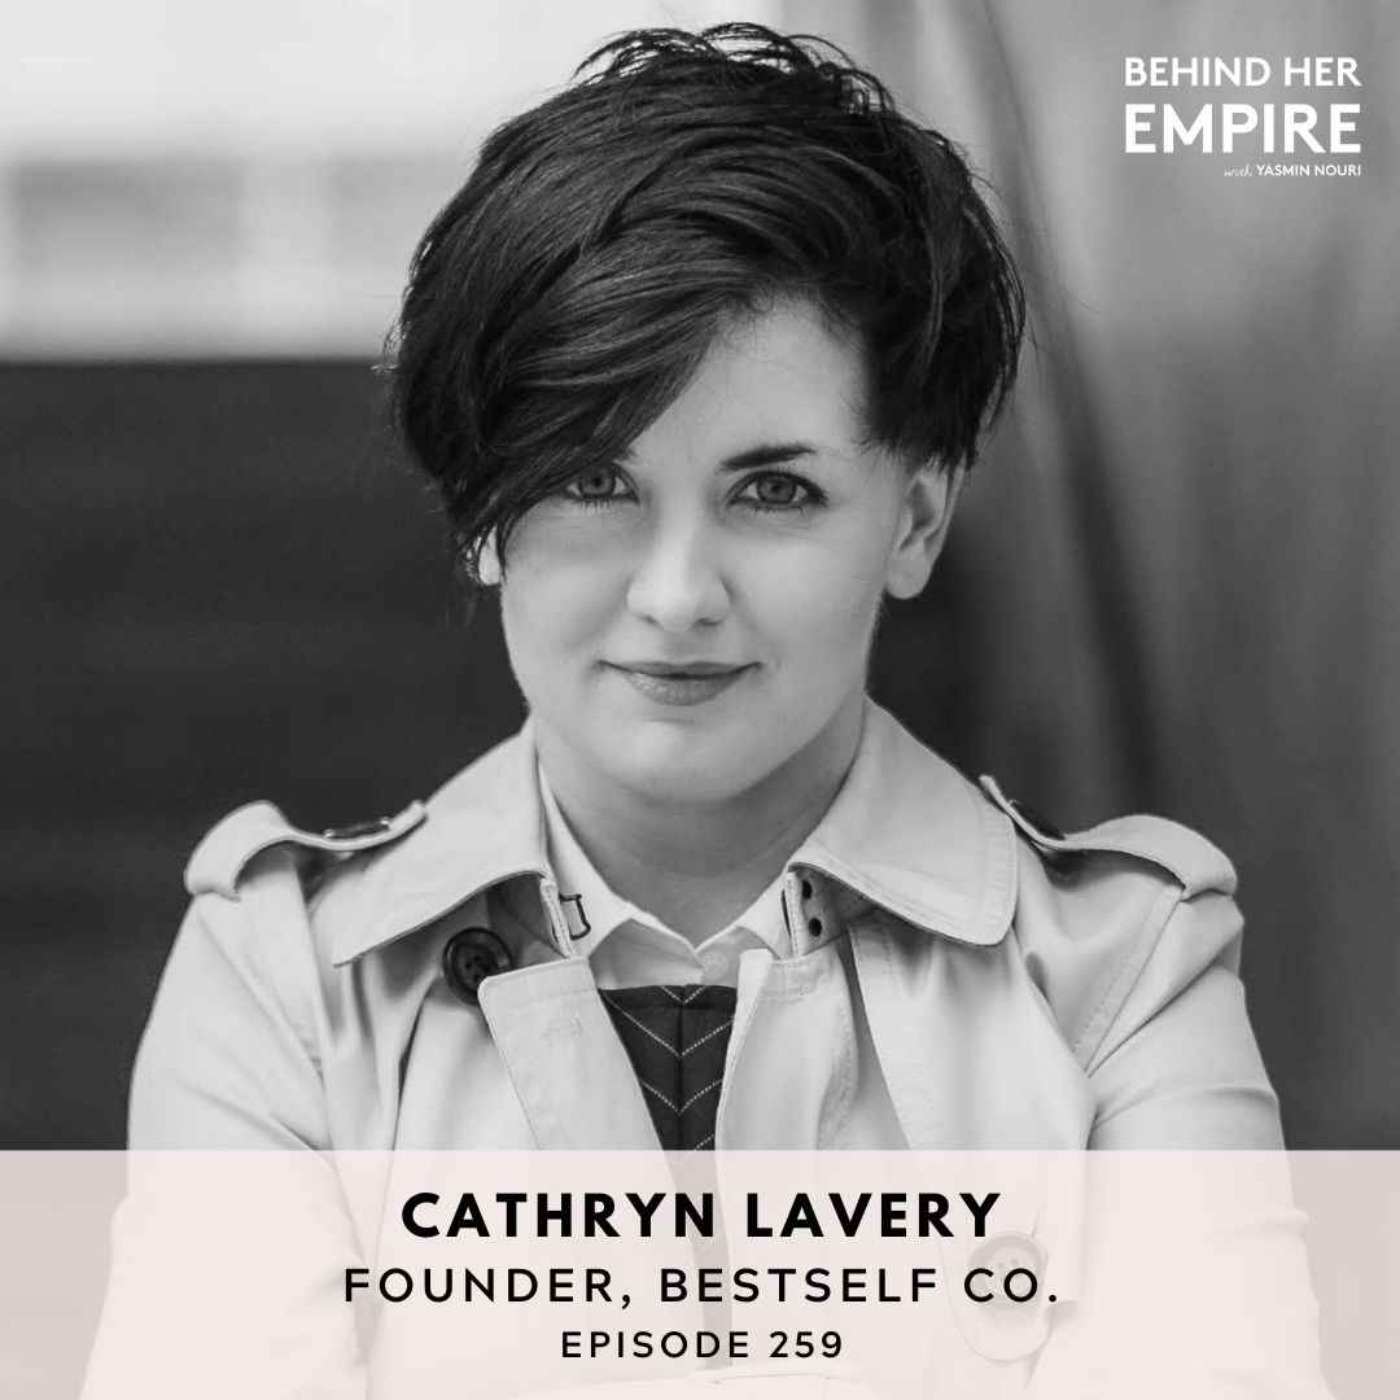 How Testing Out Countless Side Hustles Helped This Founder Go From Being Broke to Building an 8-Figure Business - Cathryn Lavery, Founder of BestSelf Co.